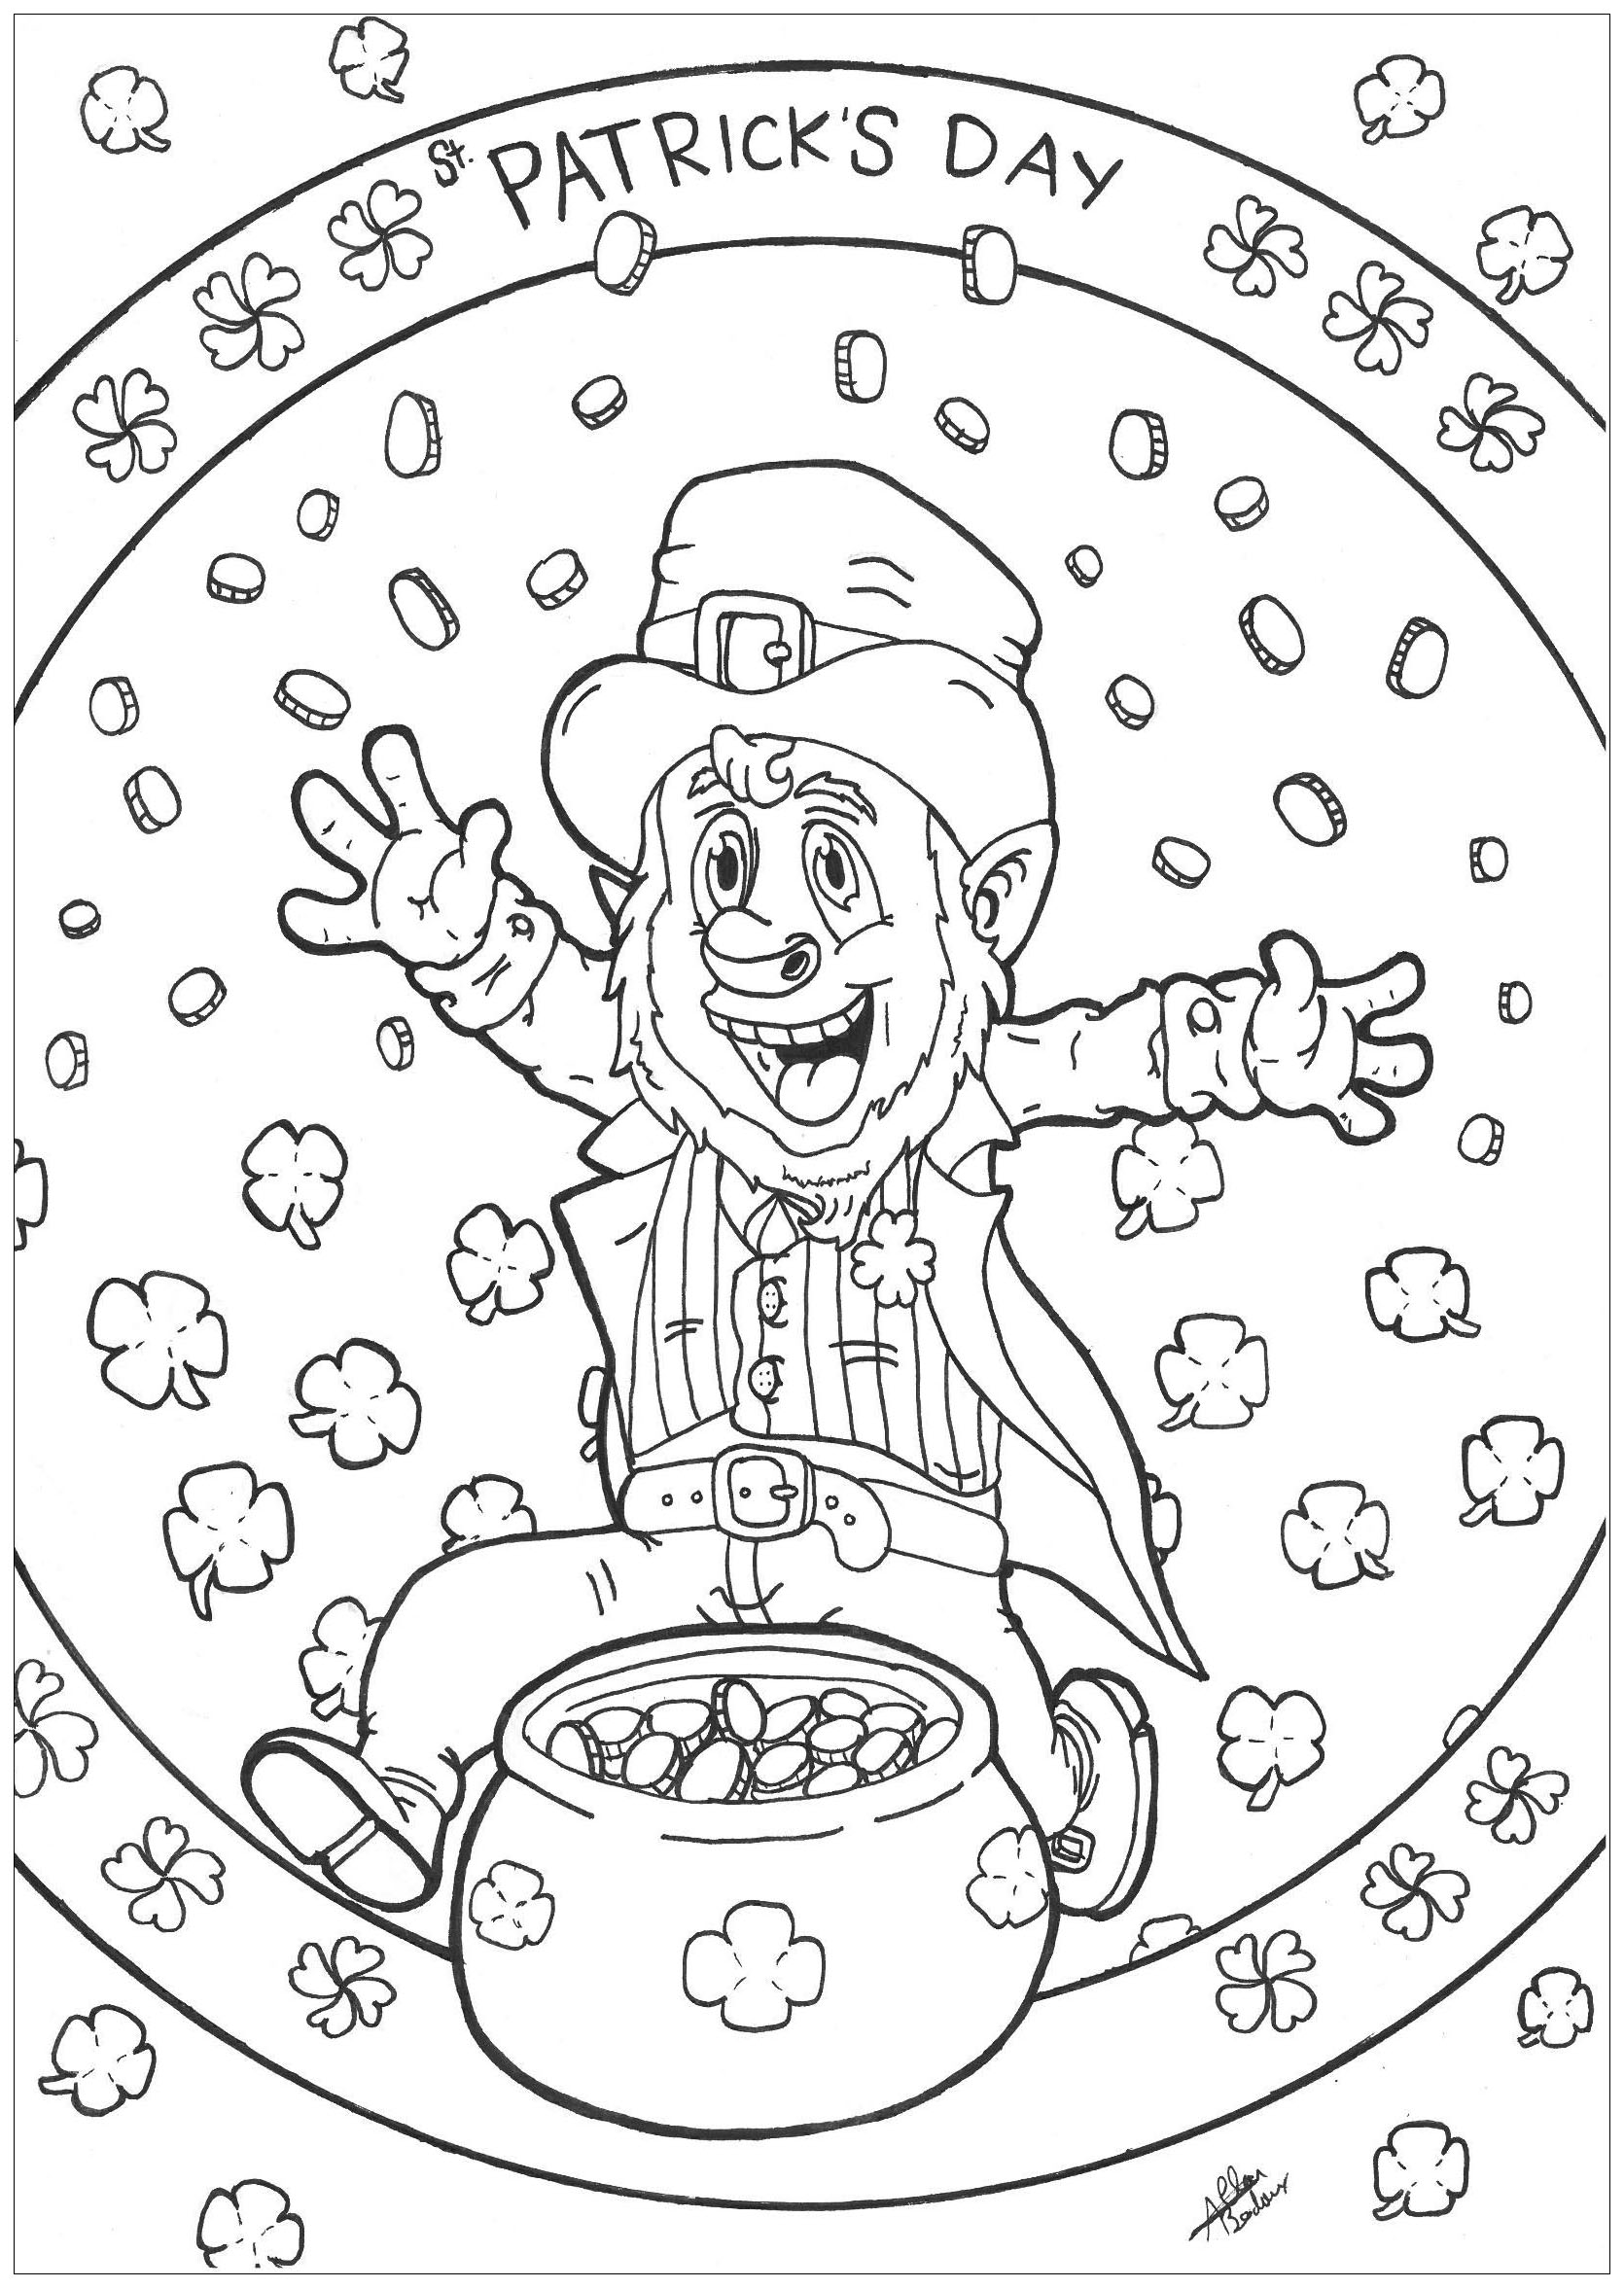 Printable St Patrick S Day Coloring Pages For Adults Get Your Hands